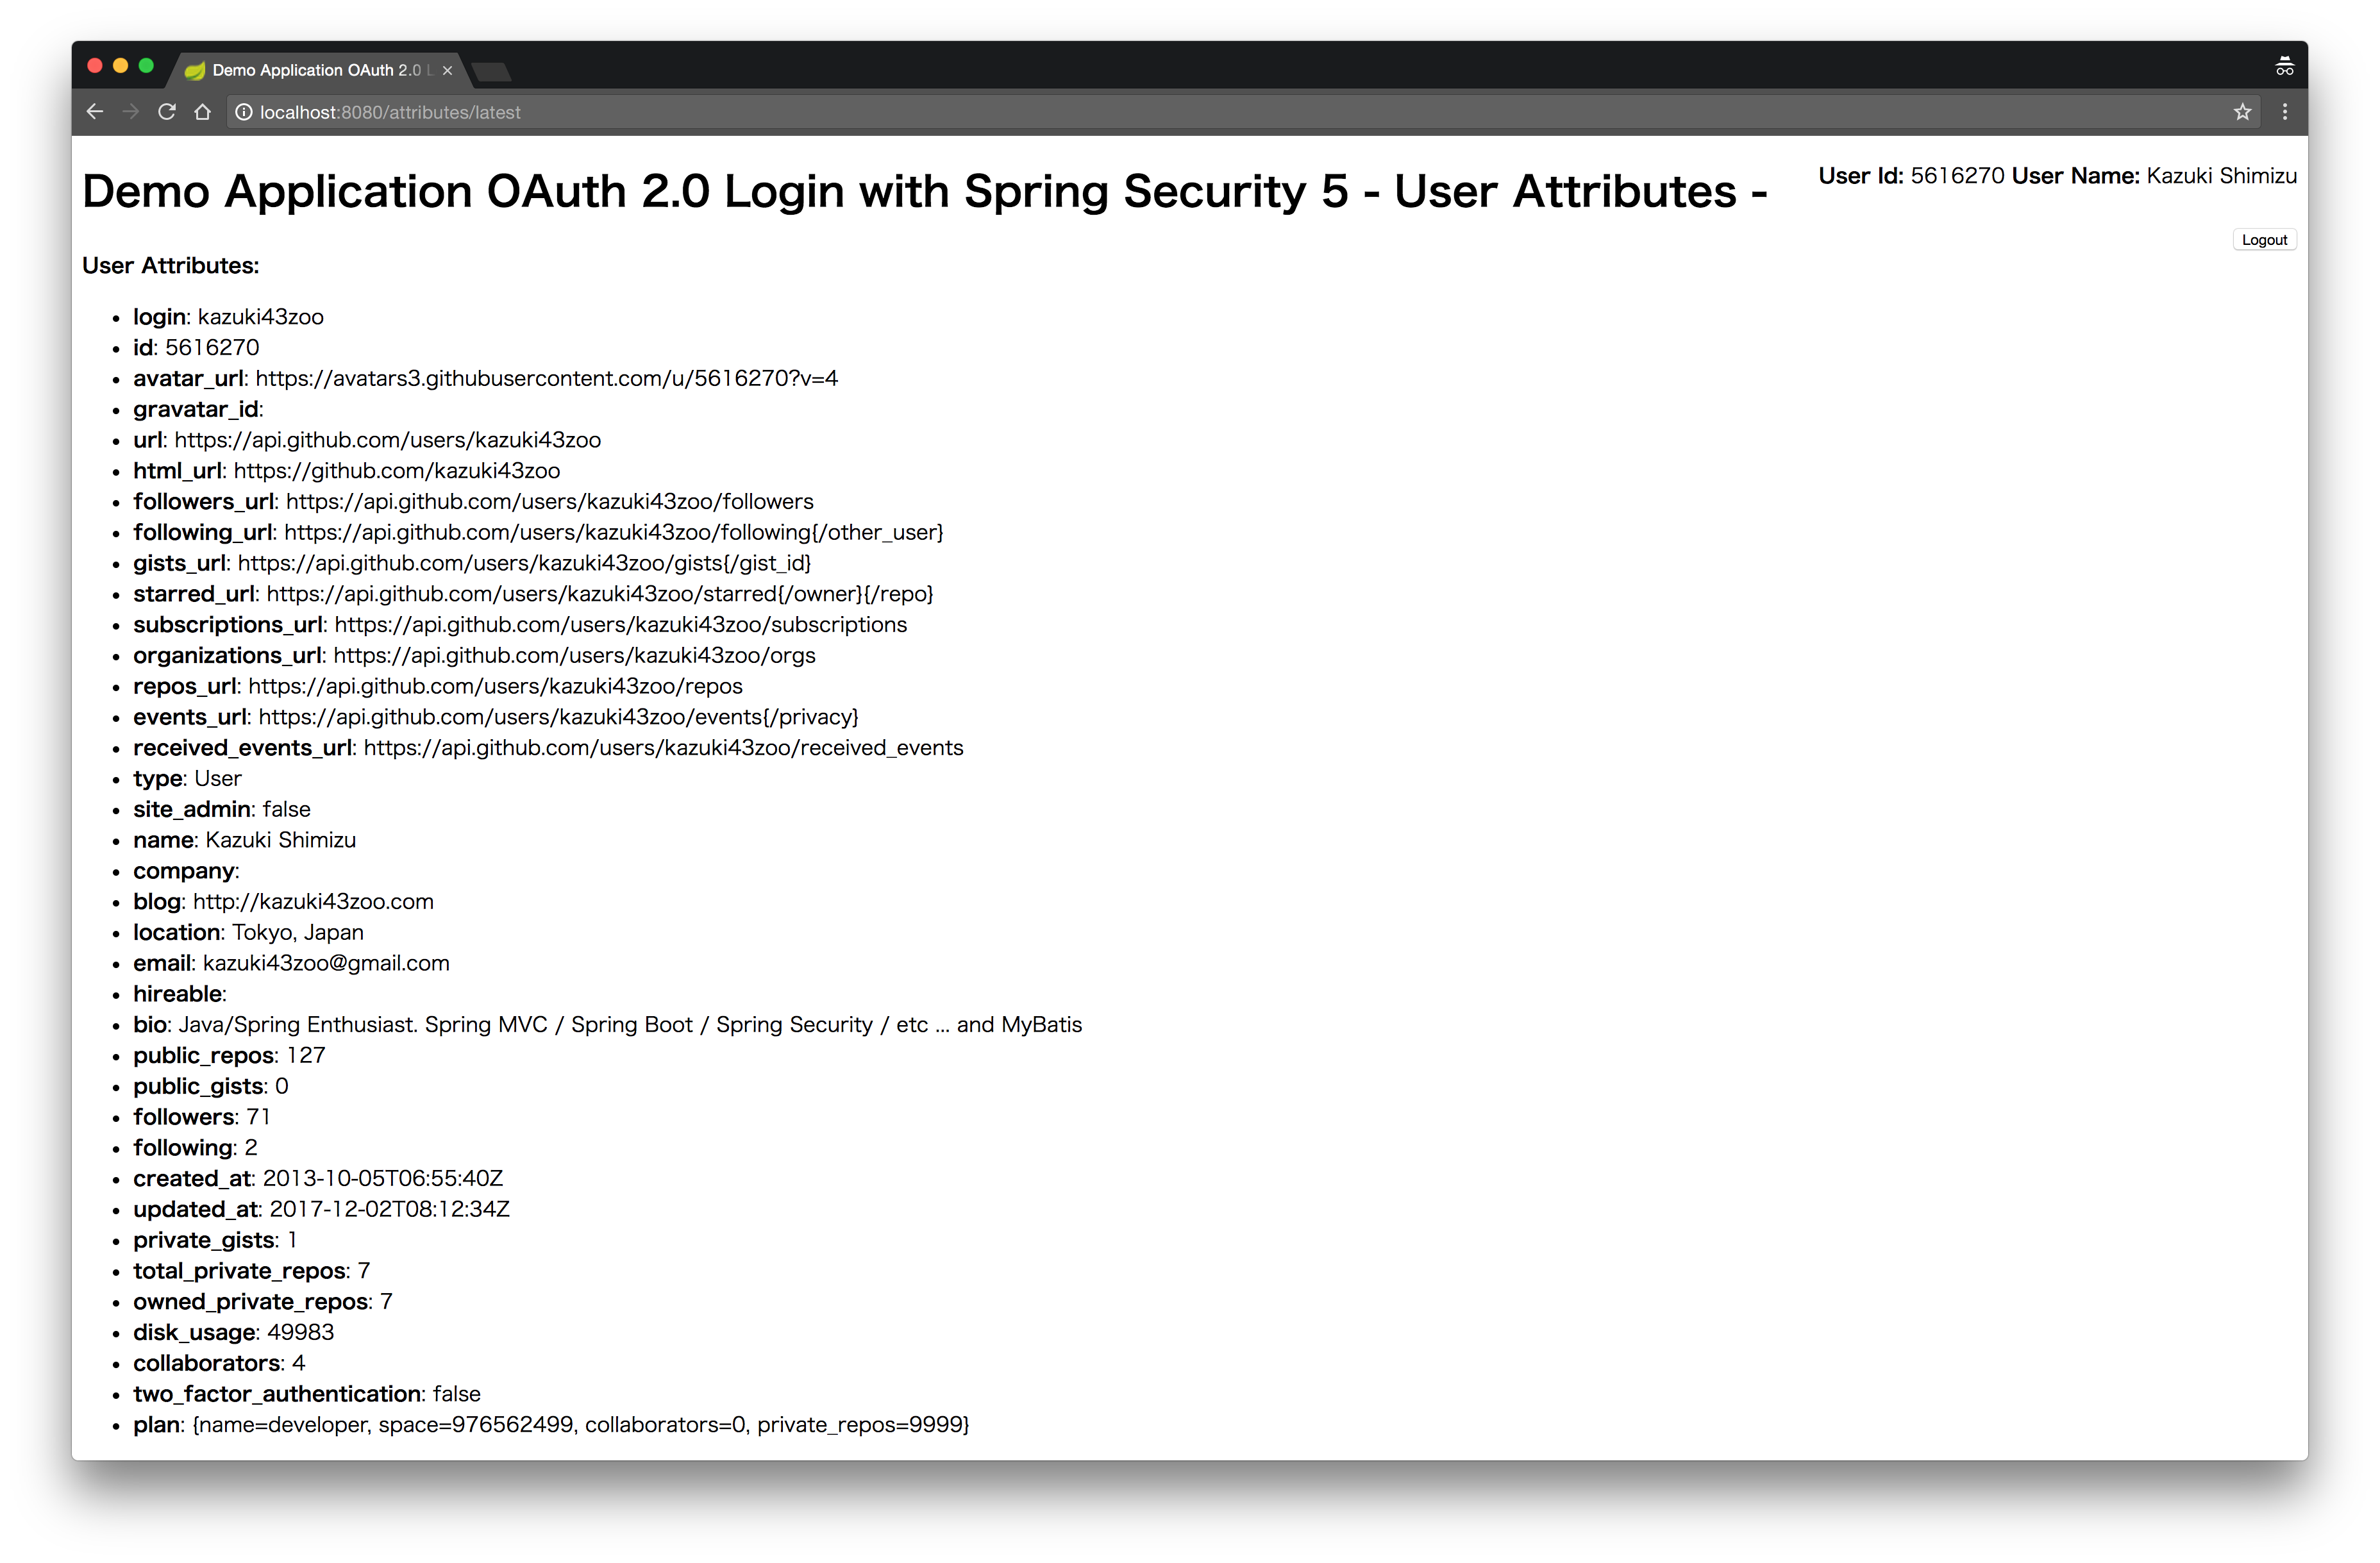 oauth2-attributes-latest-page.png